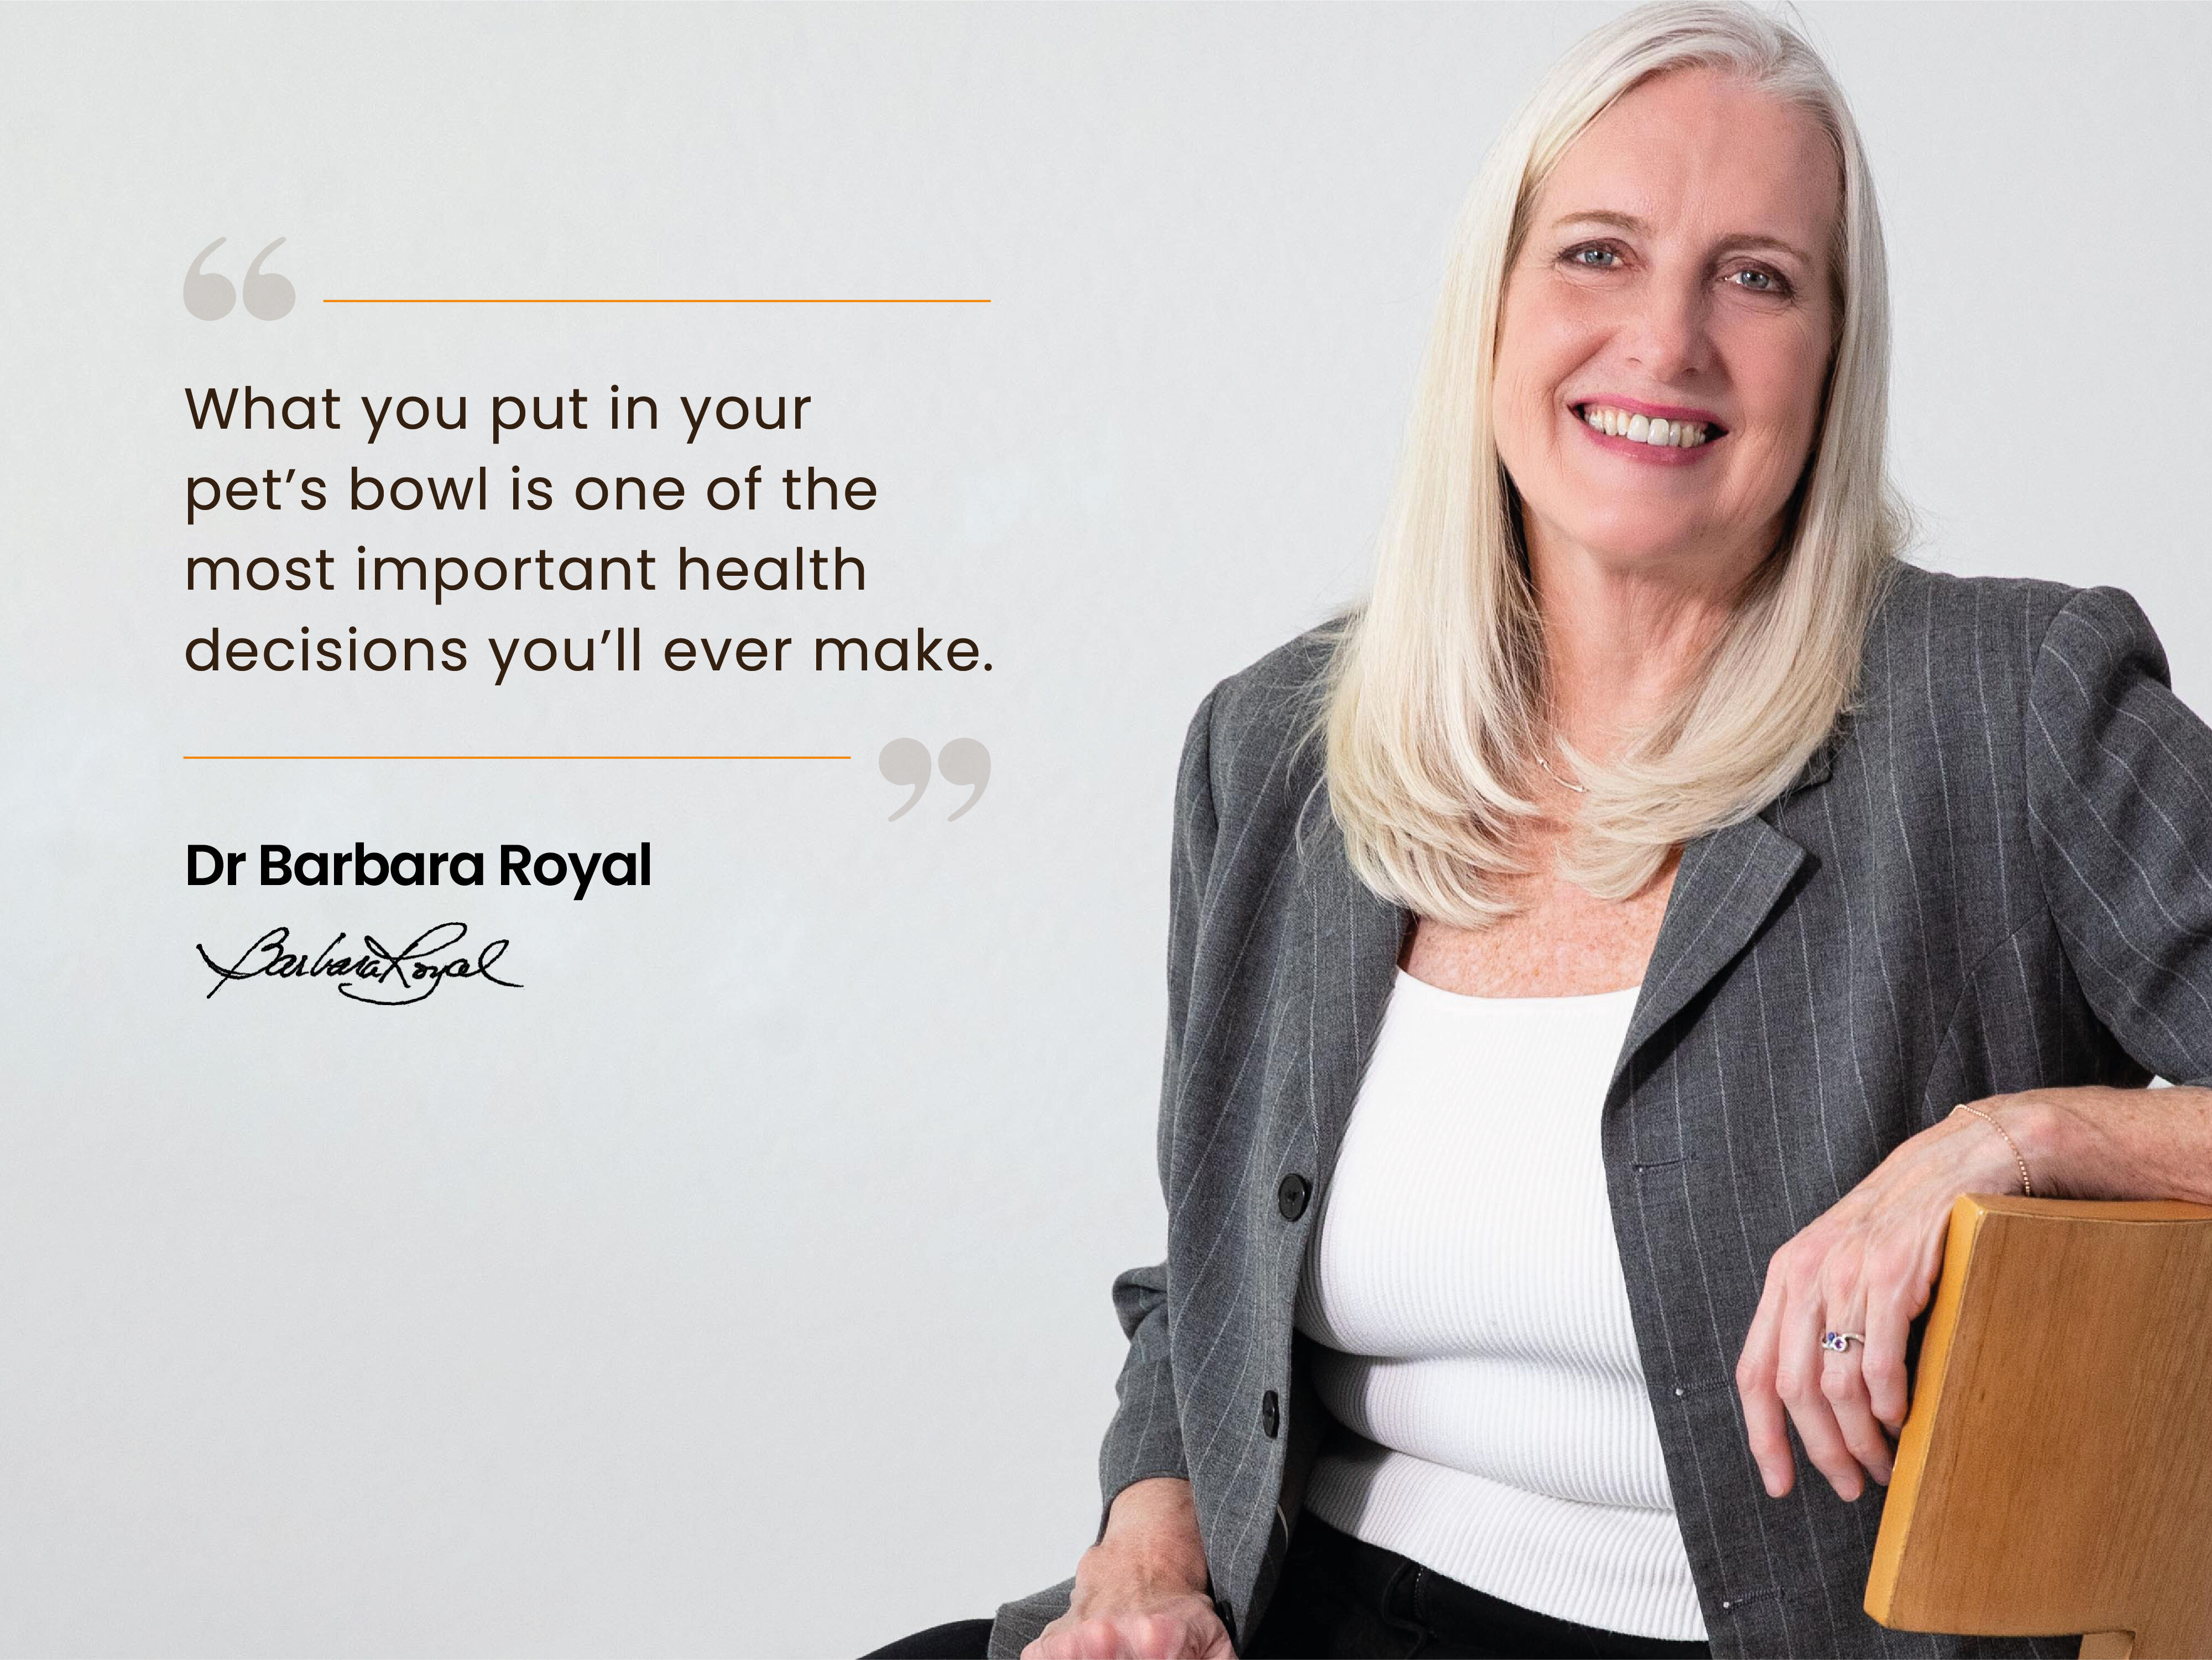 Dr Barbara Royal with her quote - “What you put in your pet’s bowl is one of the most important health decisions you’ll ever make.”